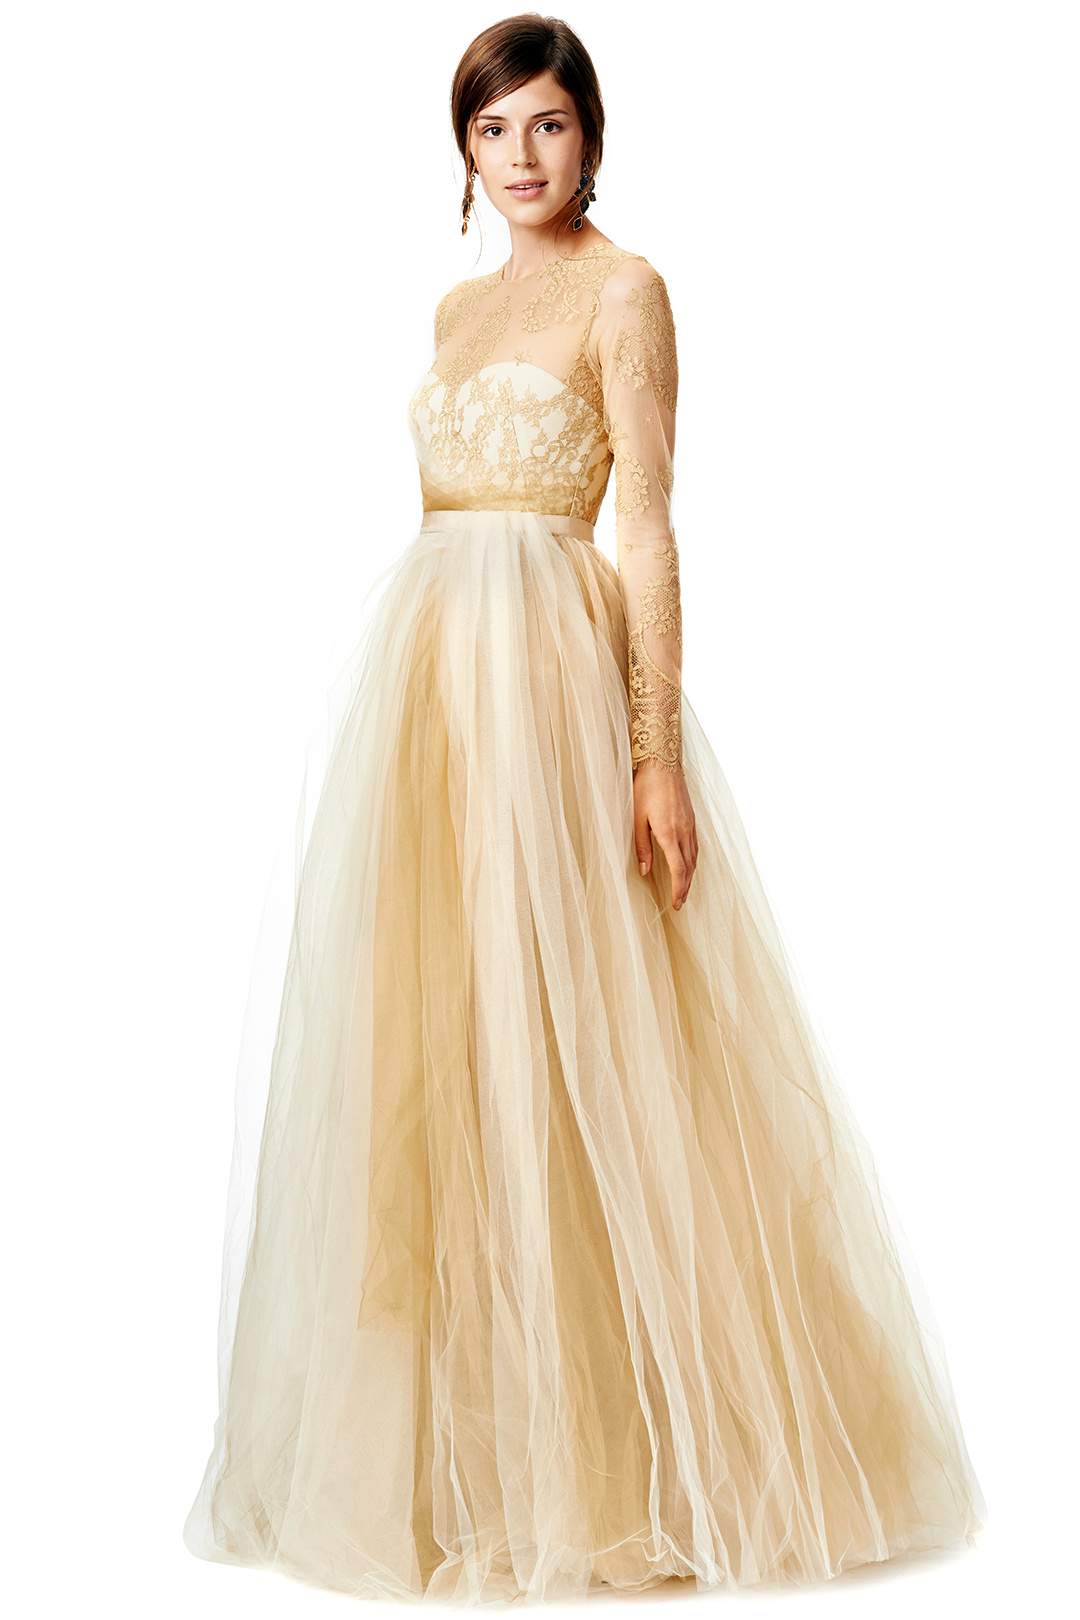 Now Trending - Gold Wedding Dresses - Dipped In Lace